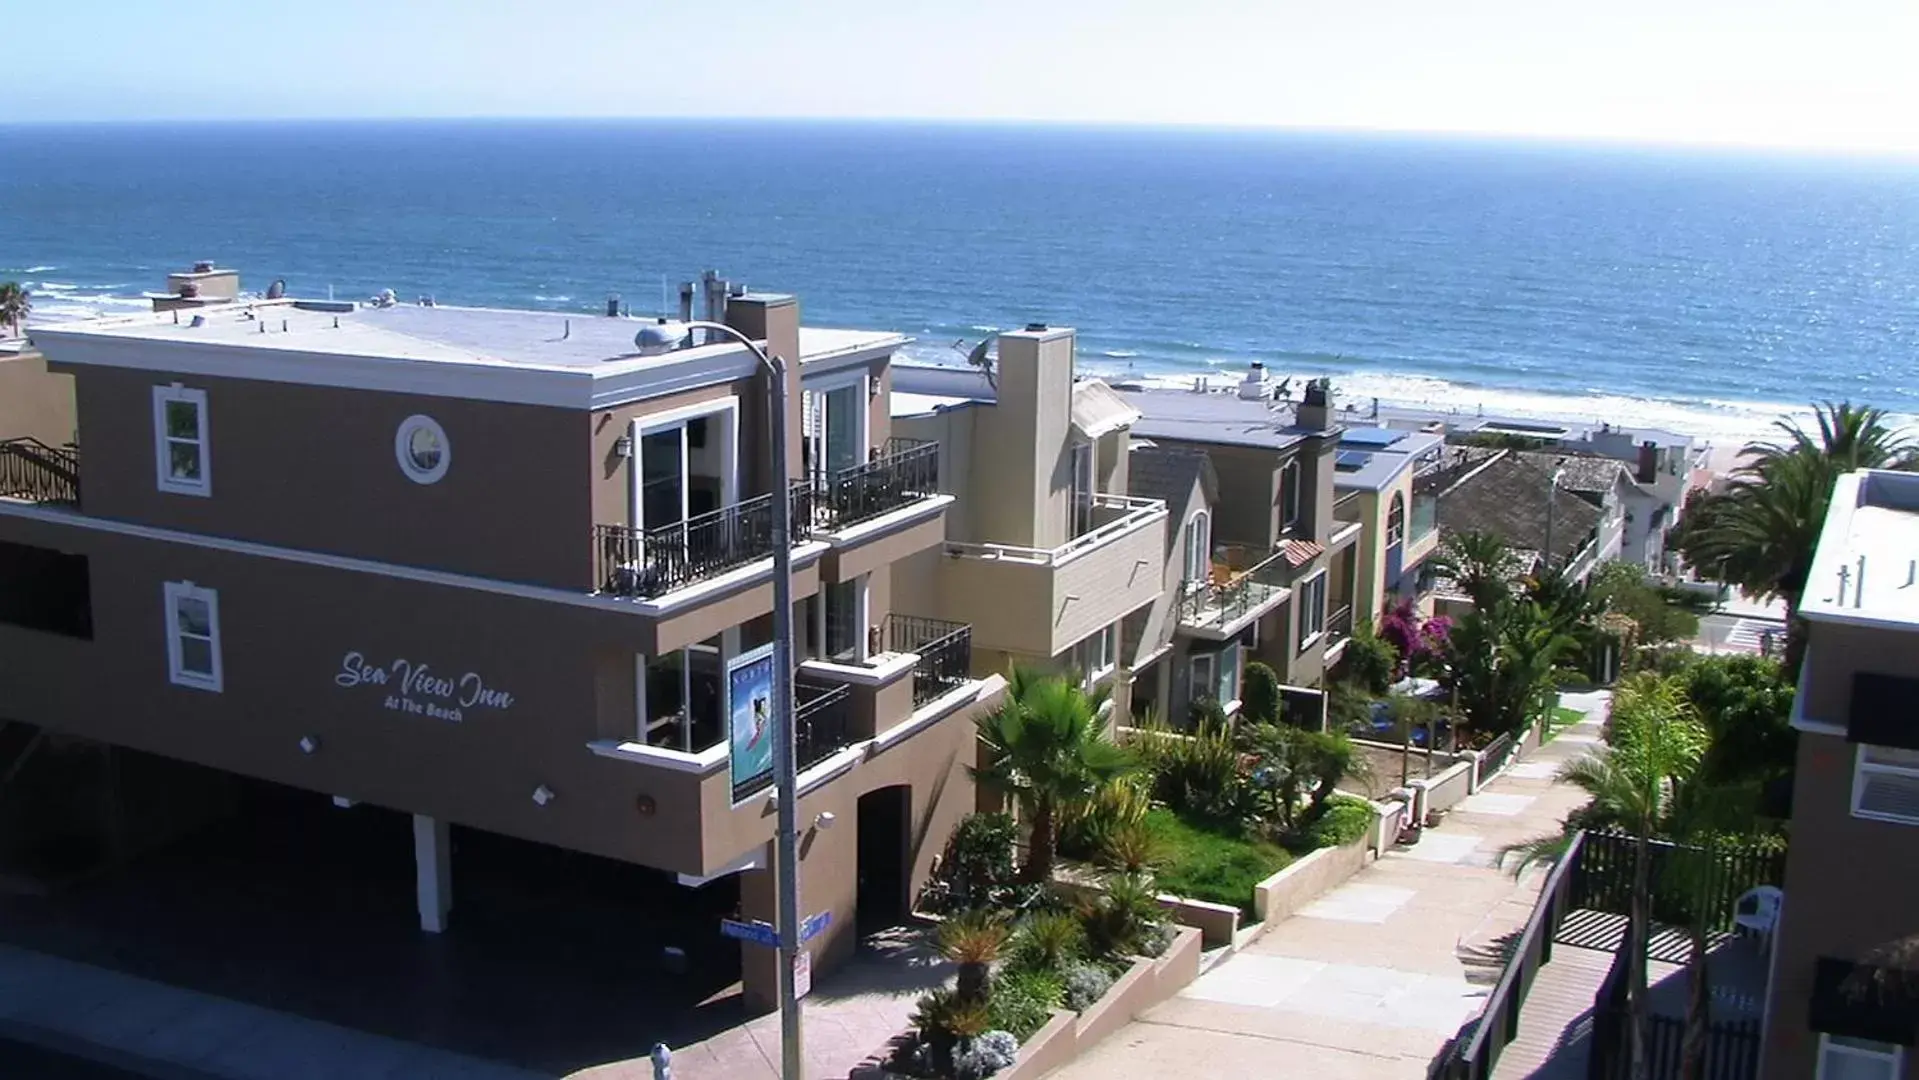 Property building, Bird's-eye View in The Sea View Inn At The Beach